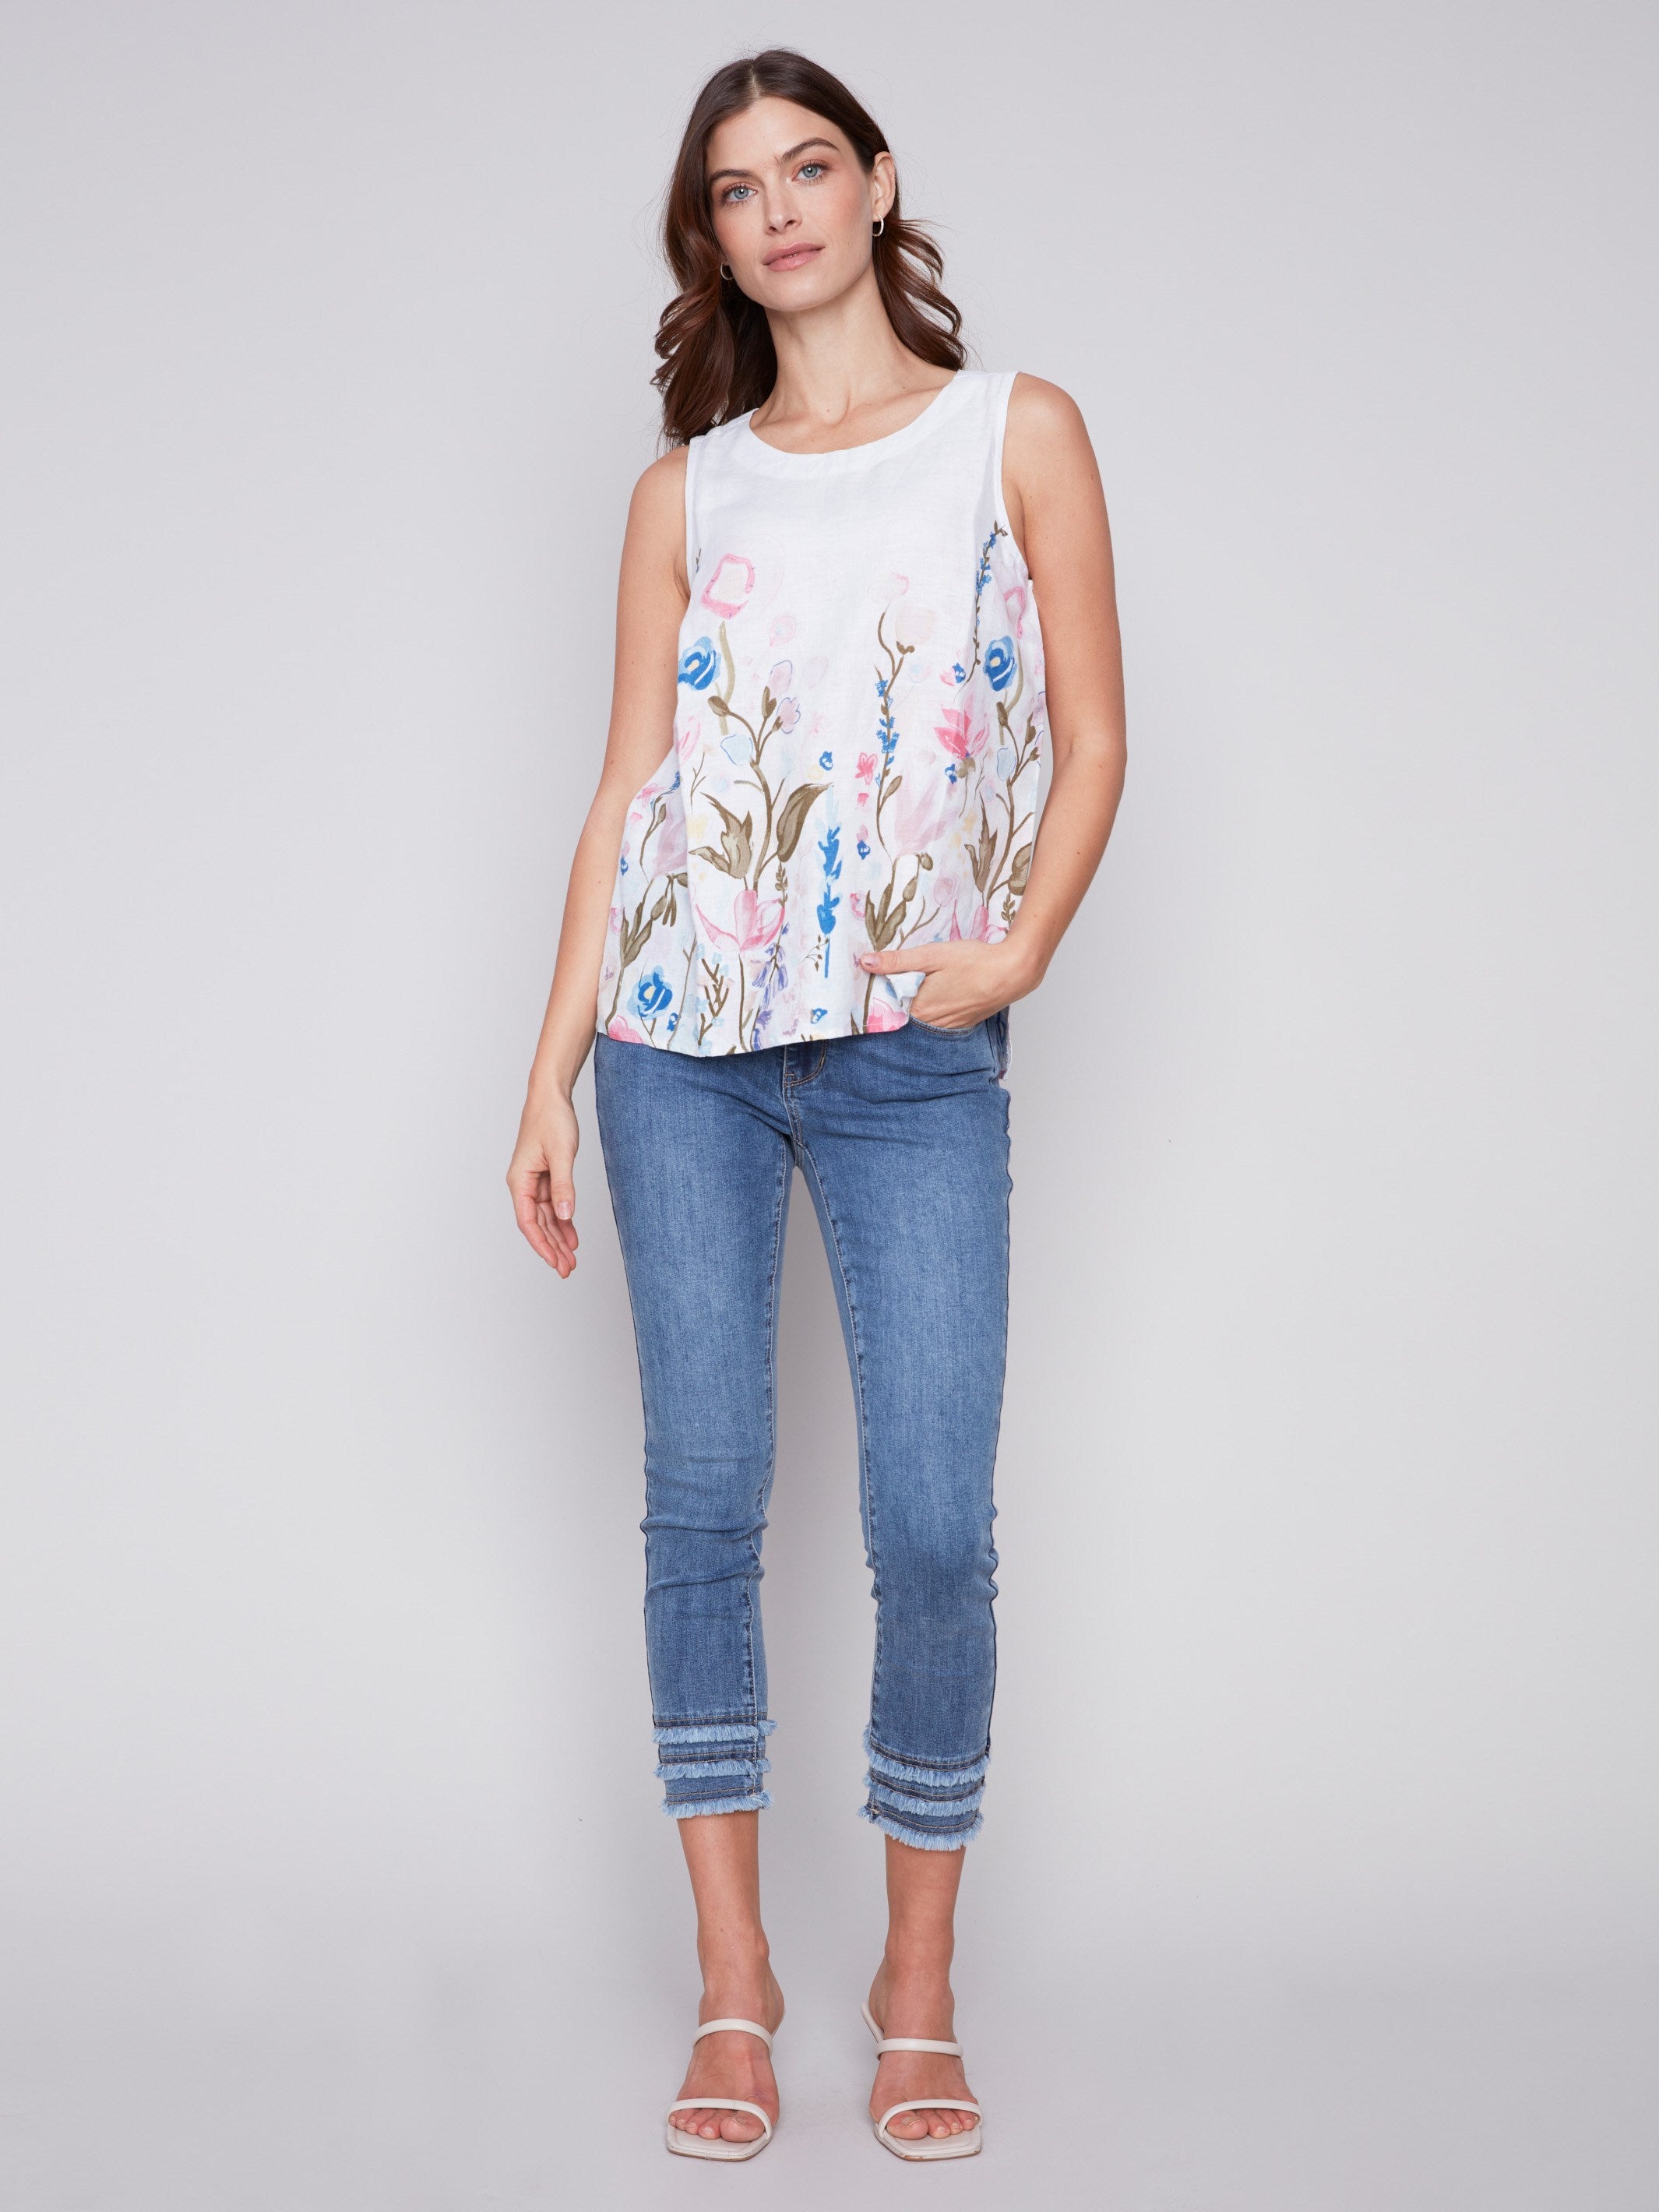 Charlie B Sleeveless Floral Printed Linen Top - Pastel - Image 3